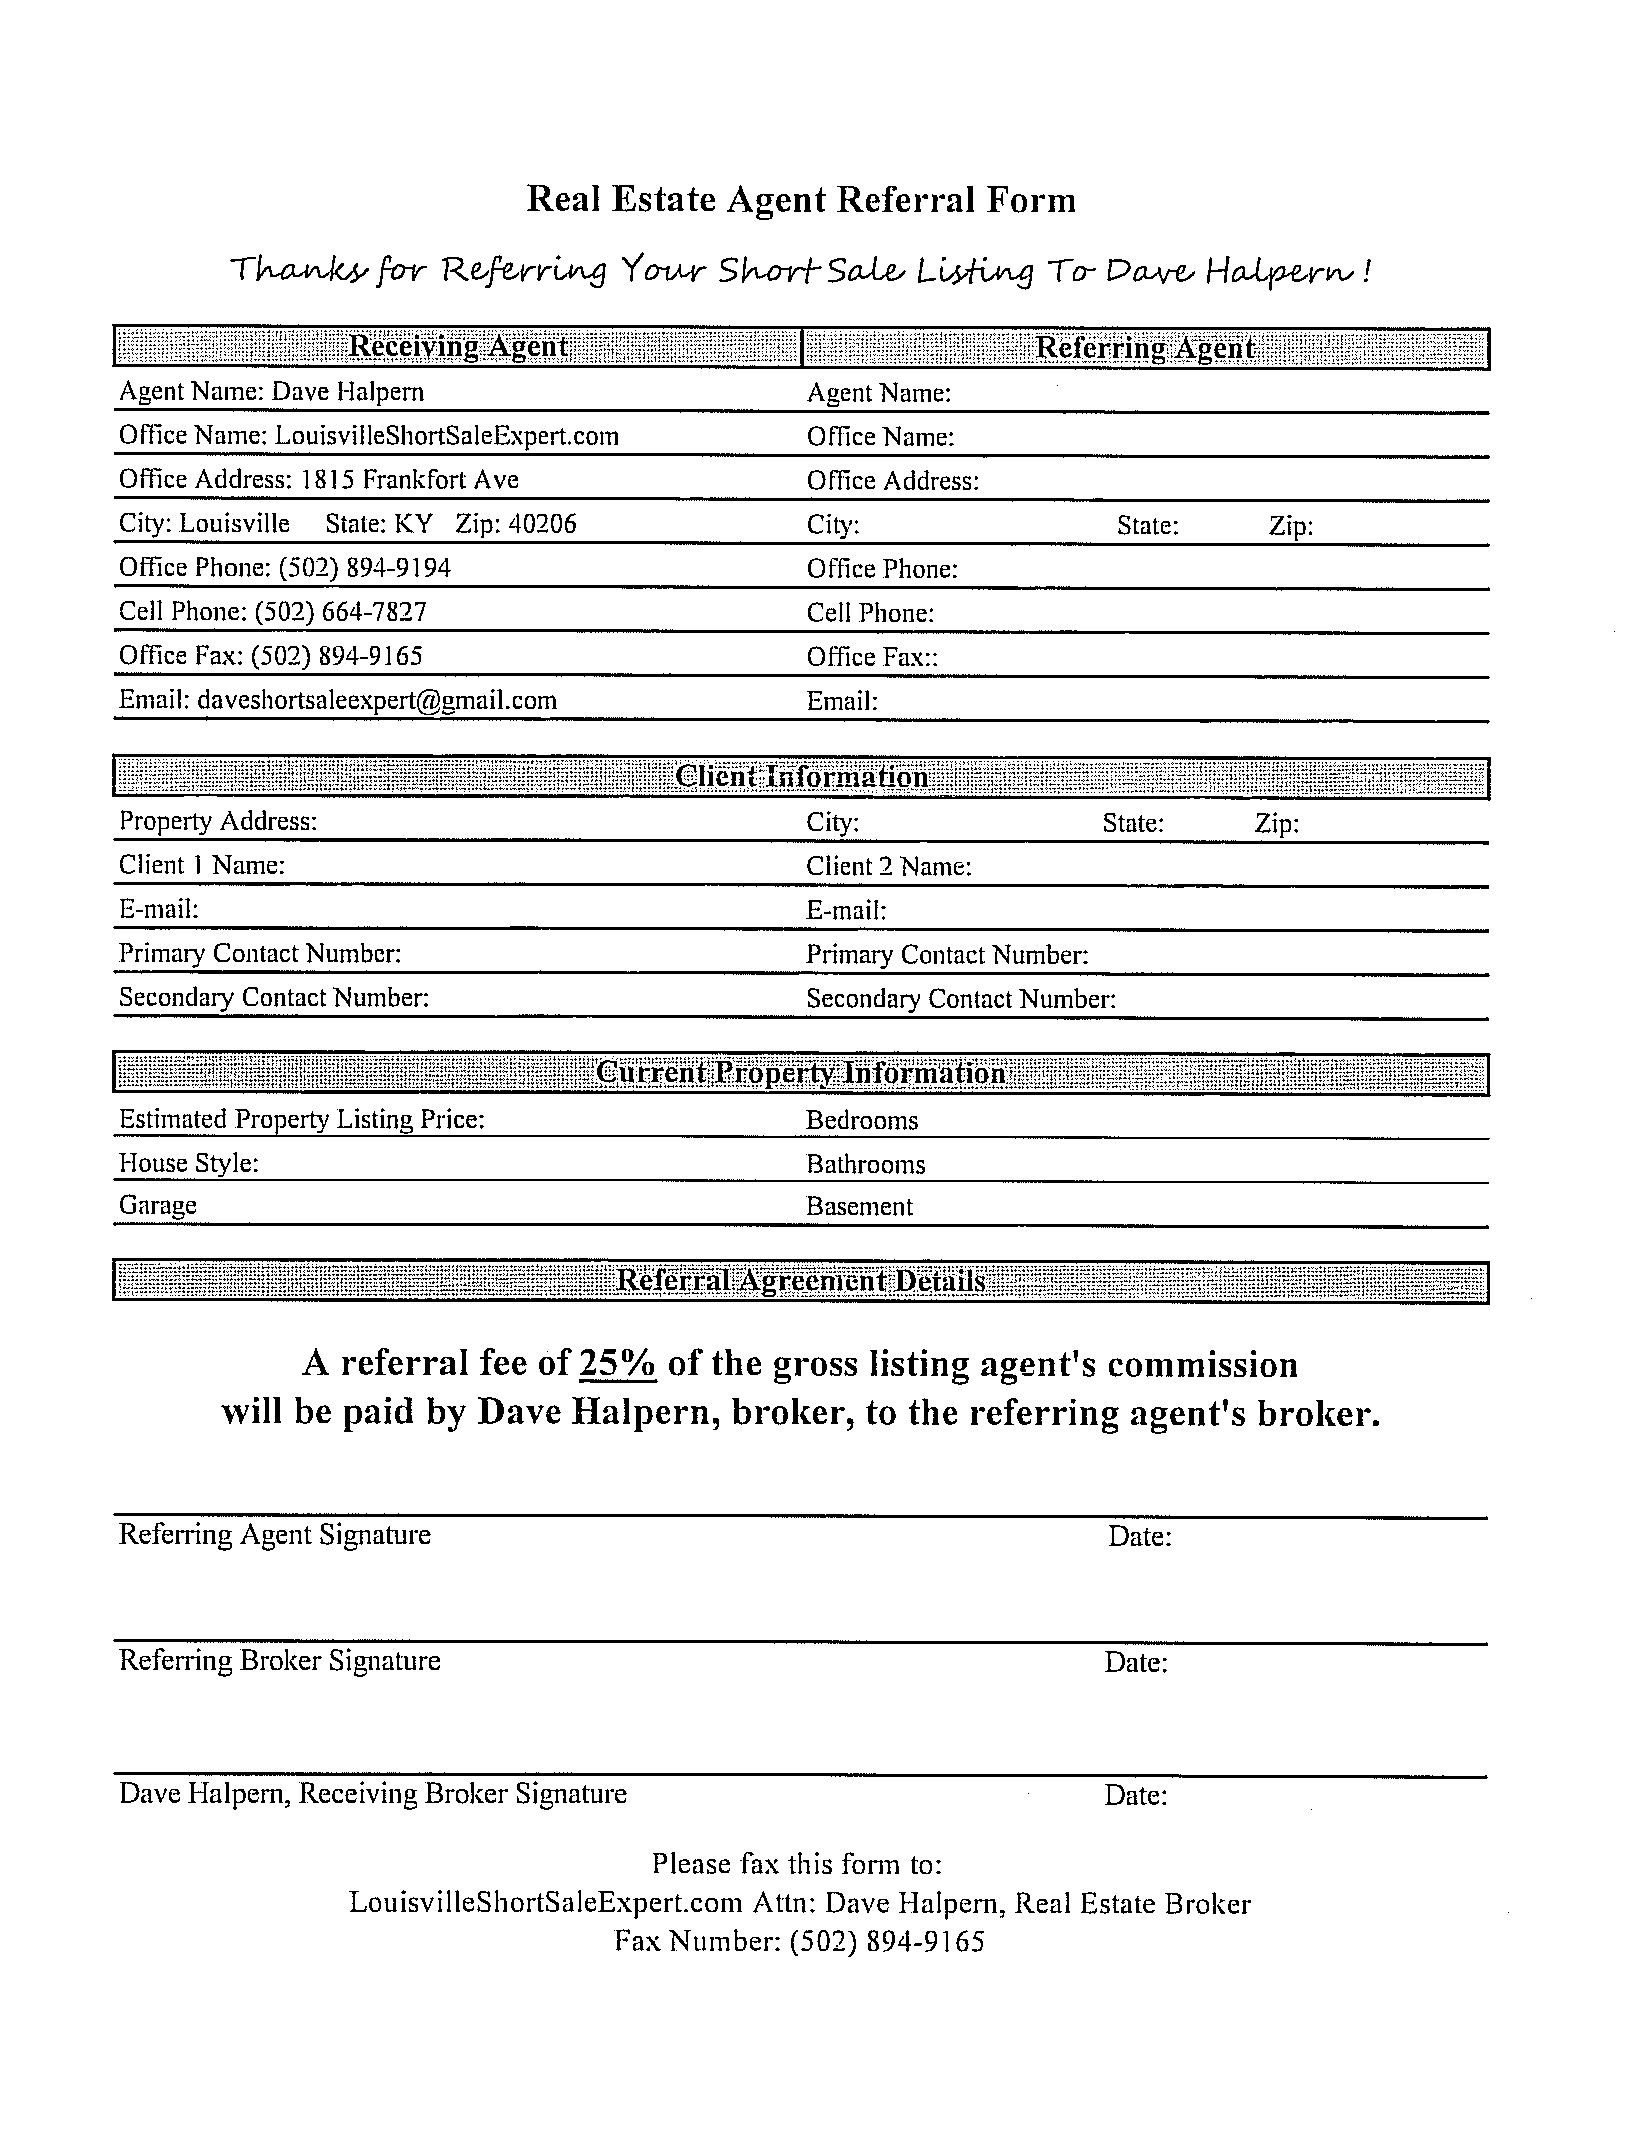 Real Estate Referral form 12 Best S Of Real Estate Agent Referral form Free